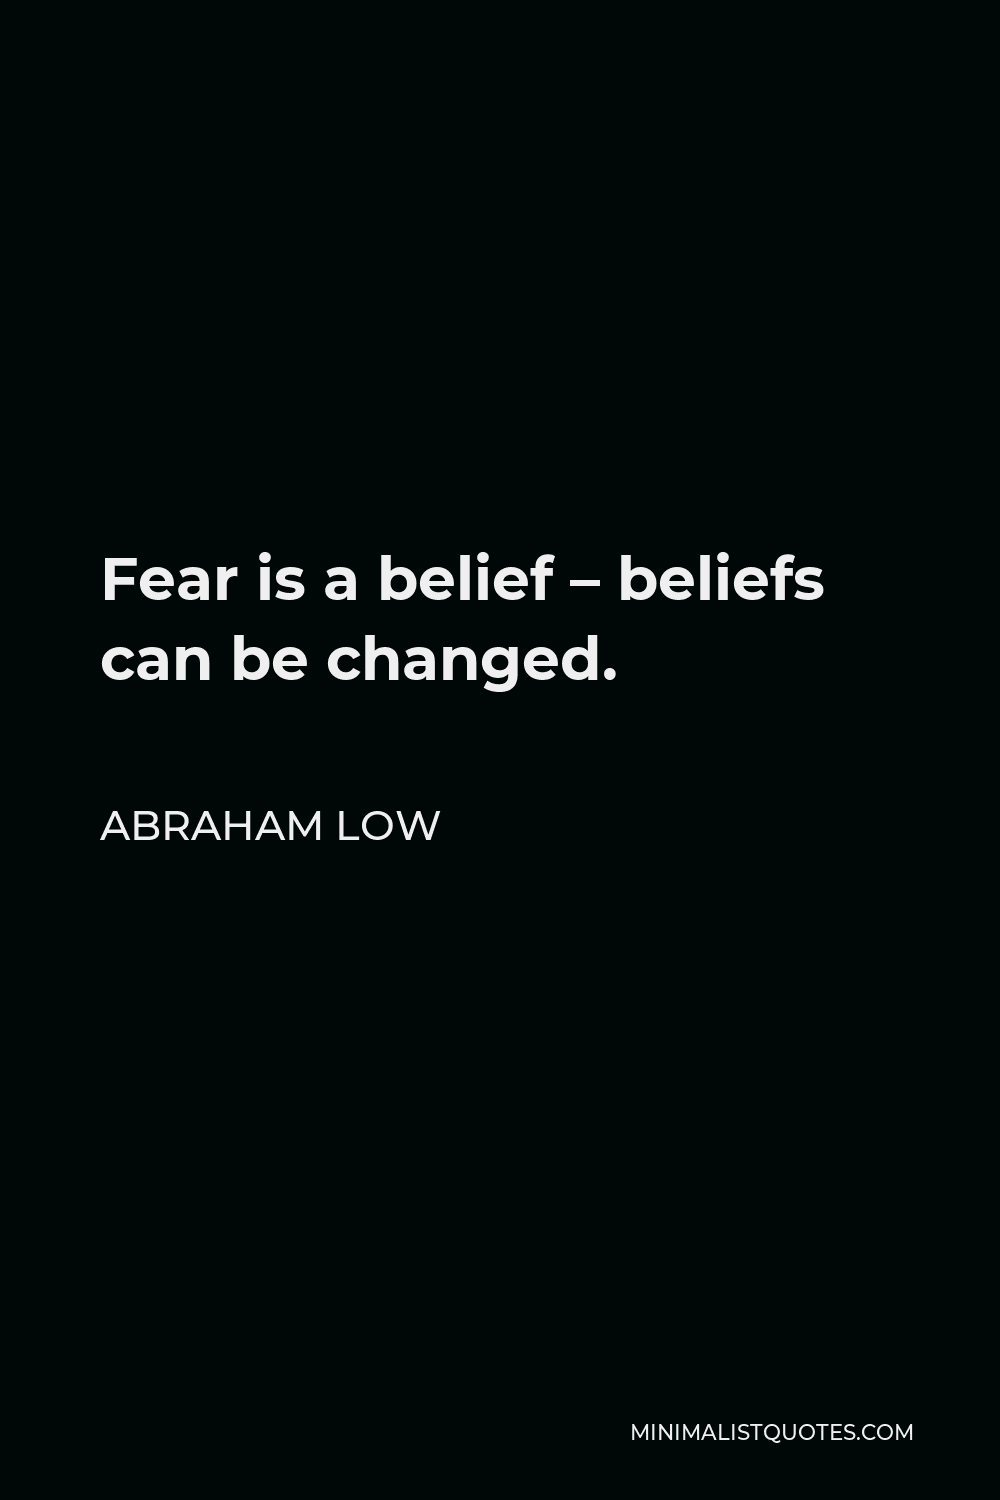 Abraham Low Quote - Fear is a belief – beliefs can be changed.